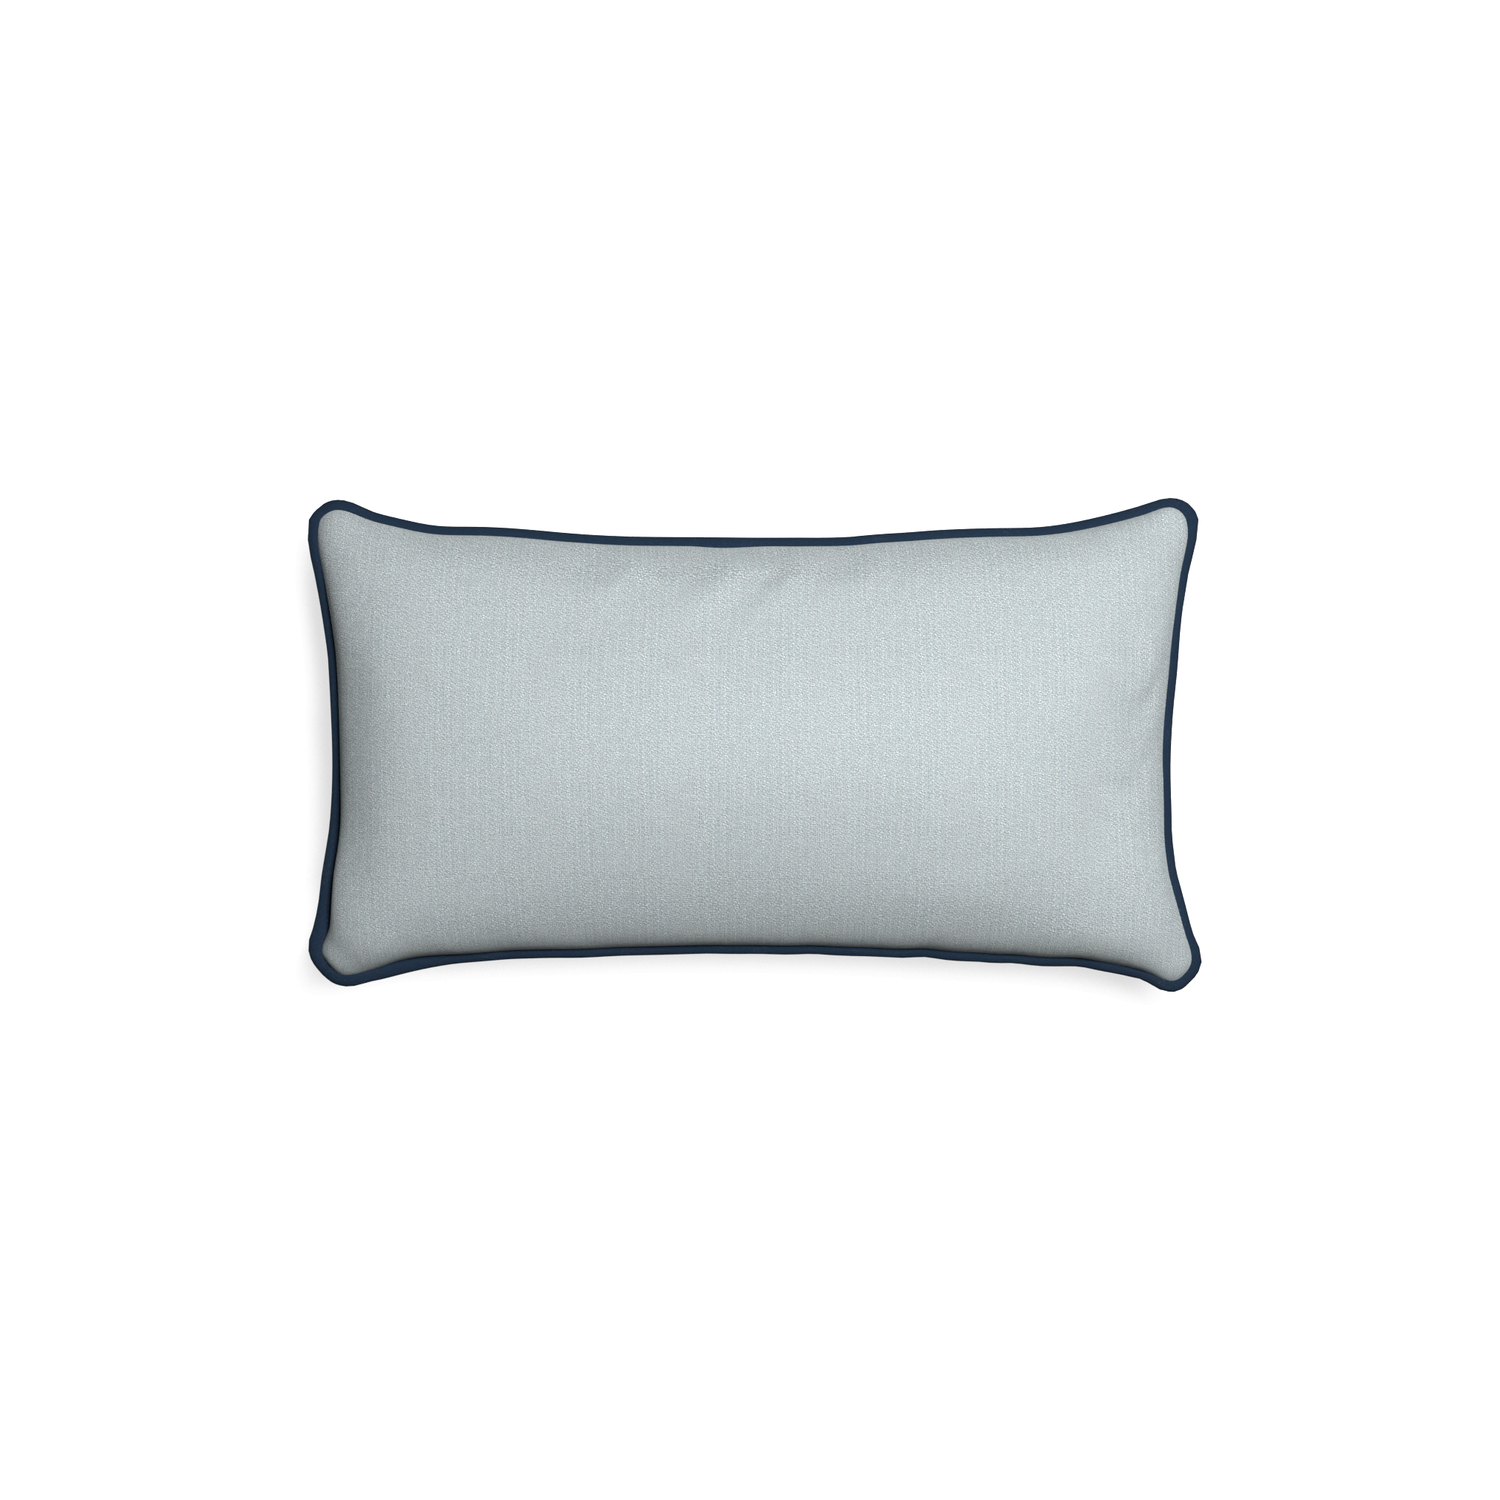 Petite-lumbar sea custom grey bluepillow with c piping on white background